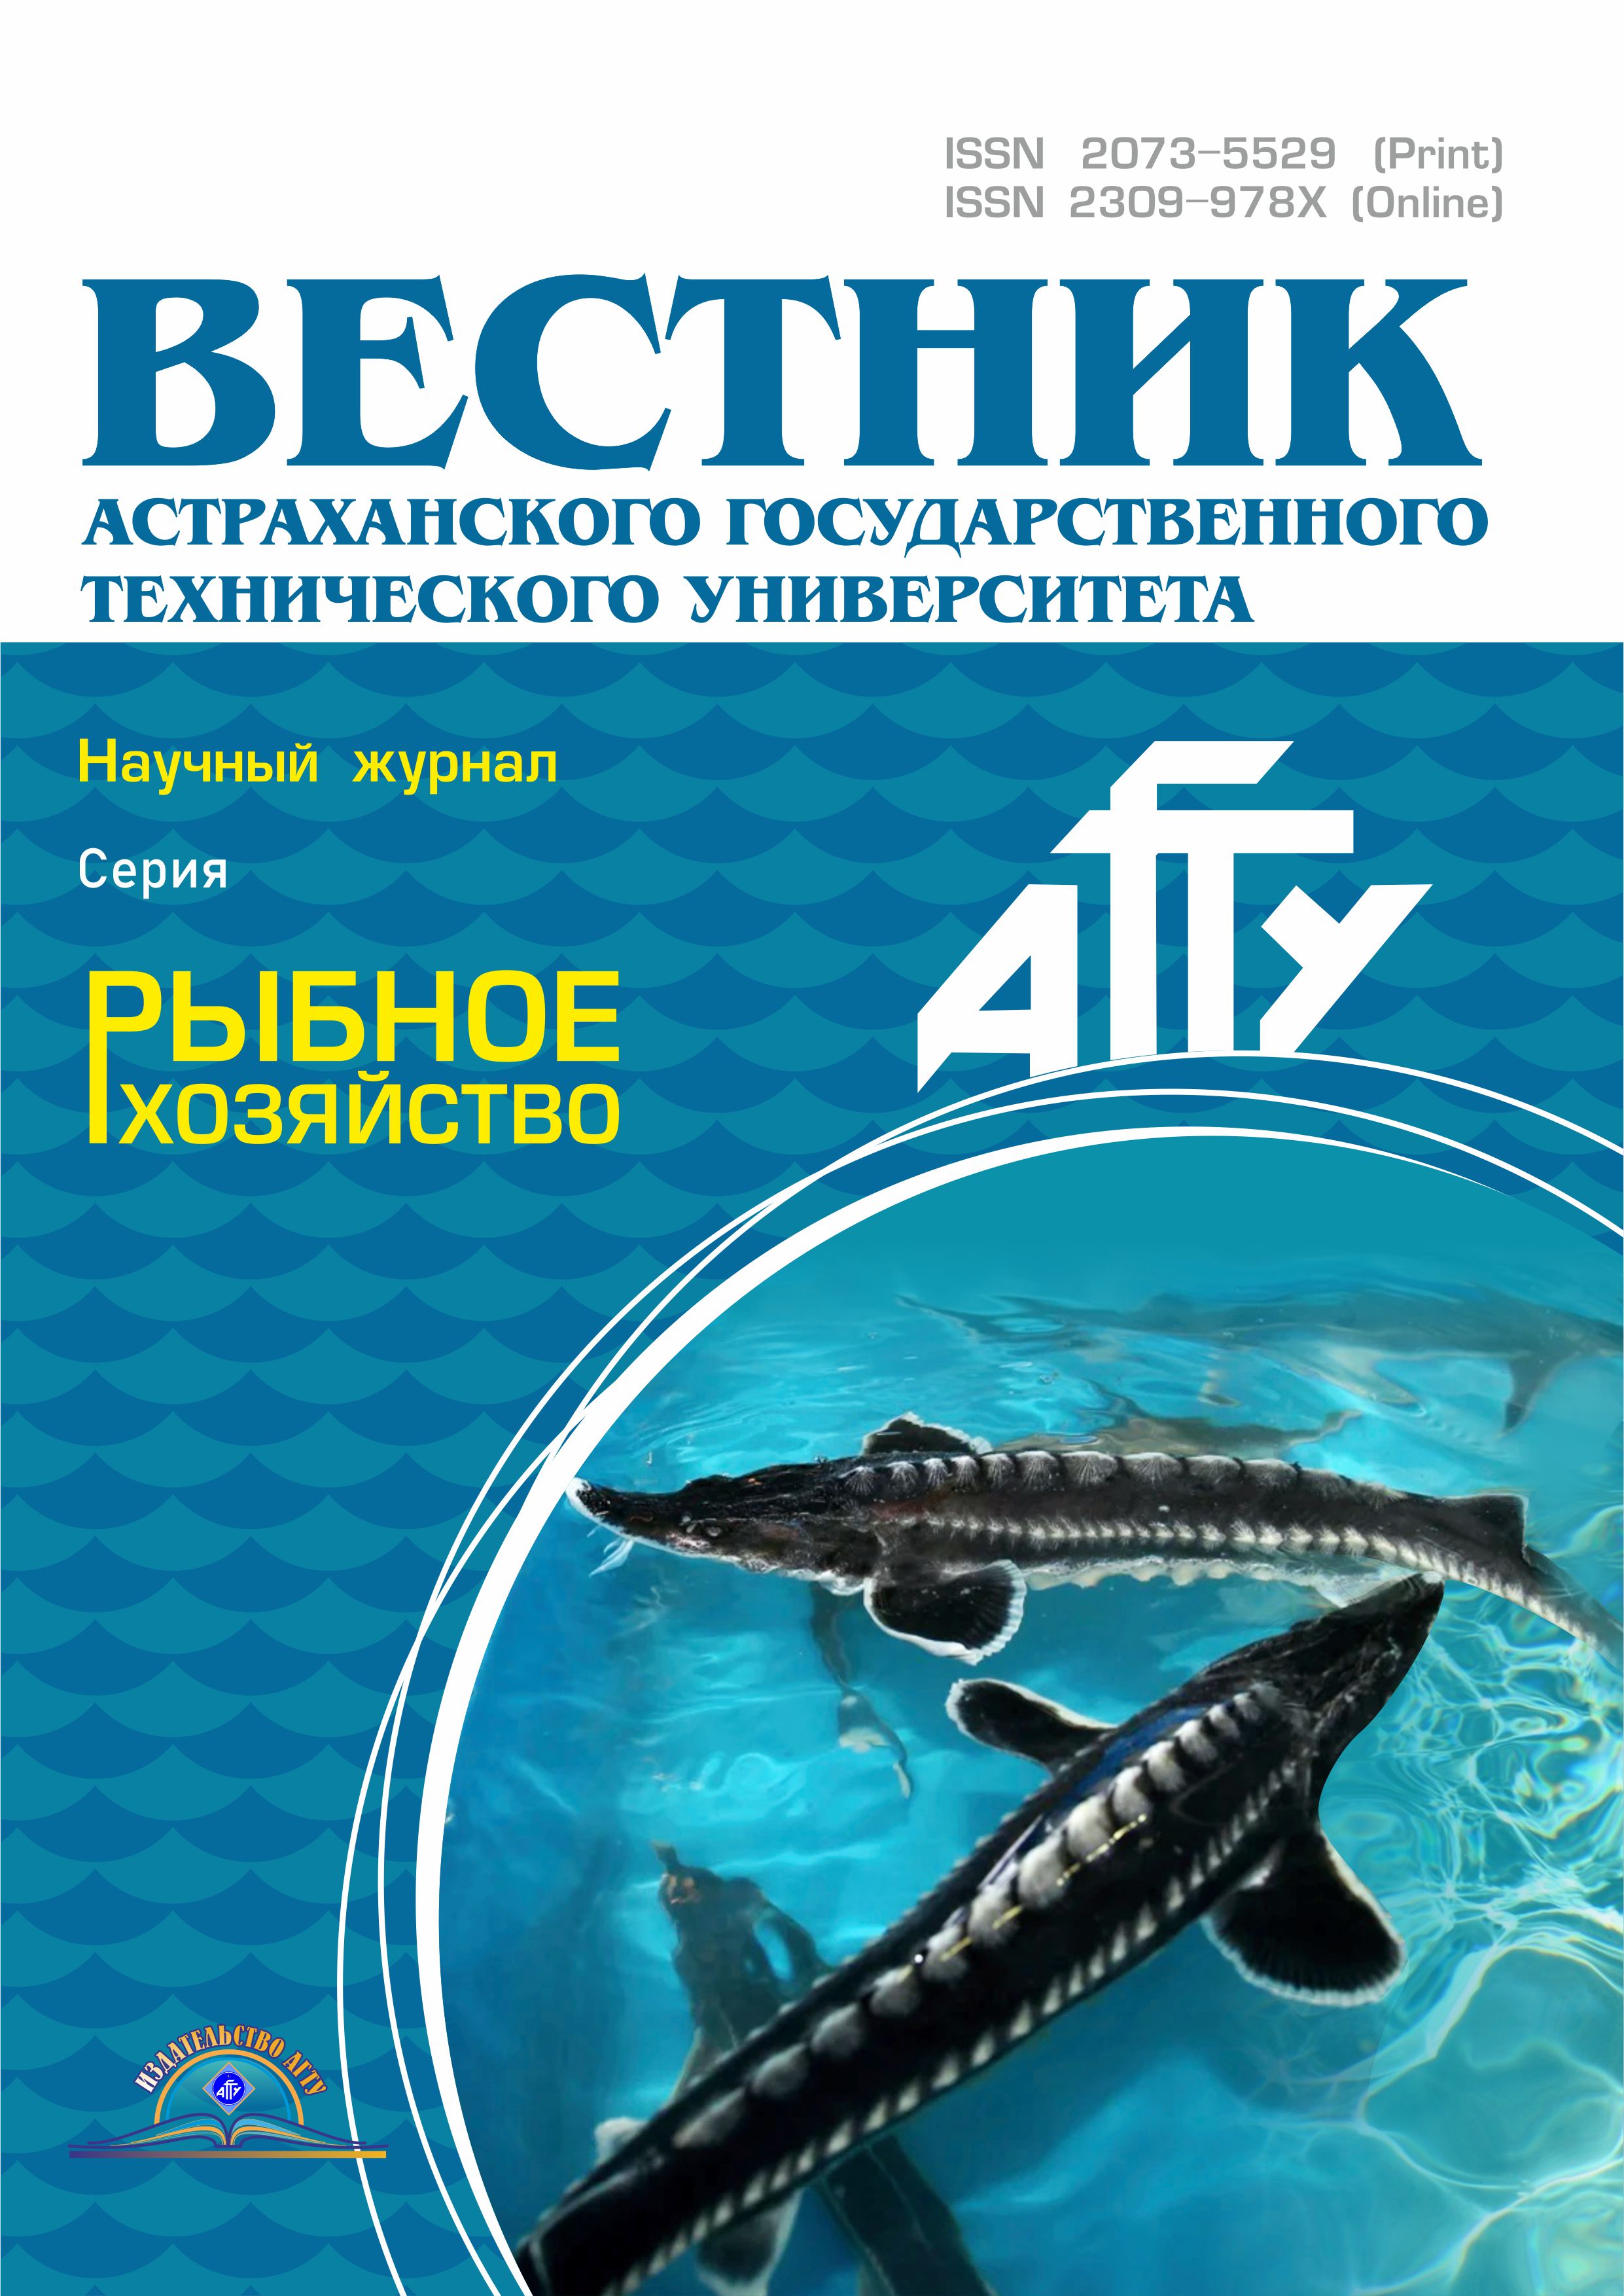                         DOMESTICATION OF PIKEPERCH INDIVIDUALS OF DIFFERENT AGE, PRODUCING OFFSPRINGS AND BREEDING PIKEPERCH YEARLINGS IN FISH-BREEDING FARM OF THE ALMATY REGION OF KAZAKHSTAN
            